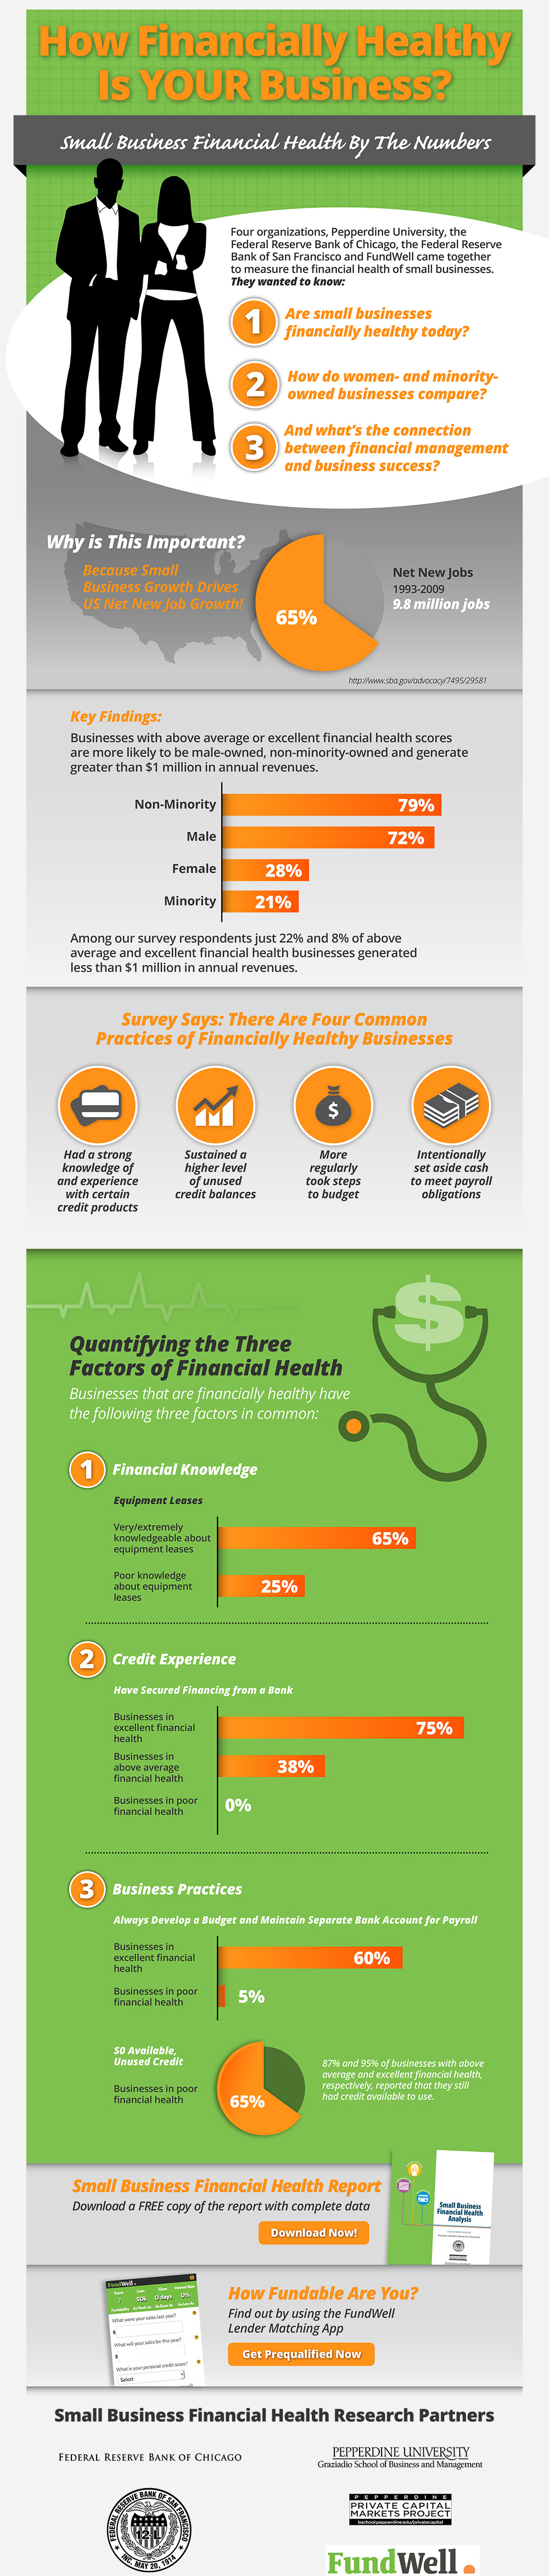 How Financially Healthy is Your business?